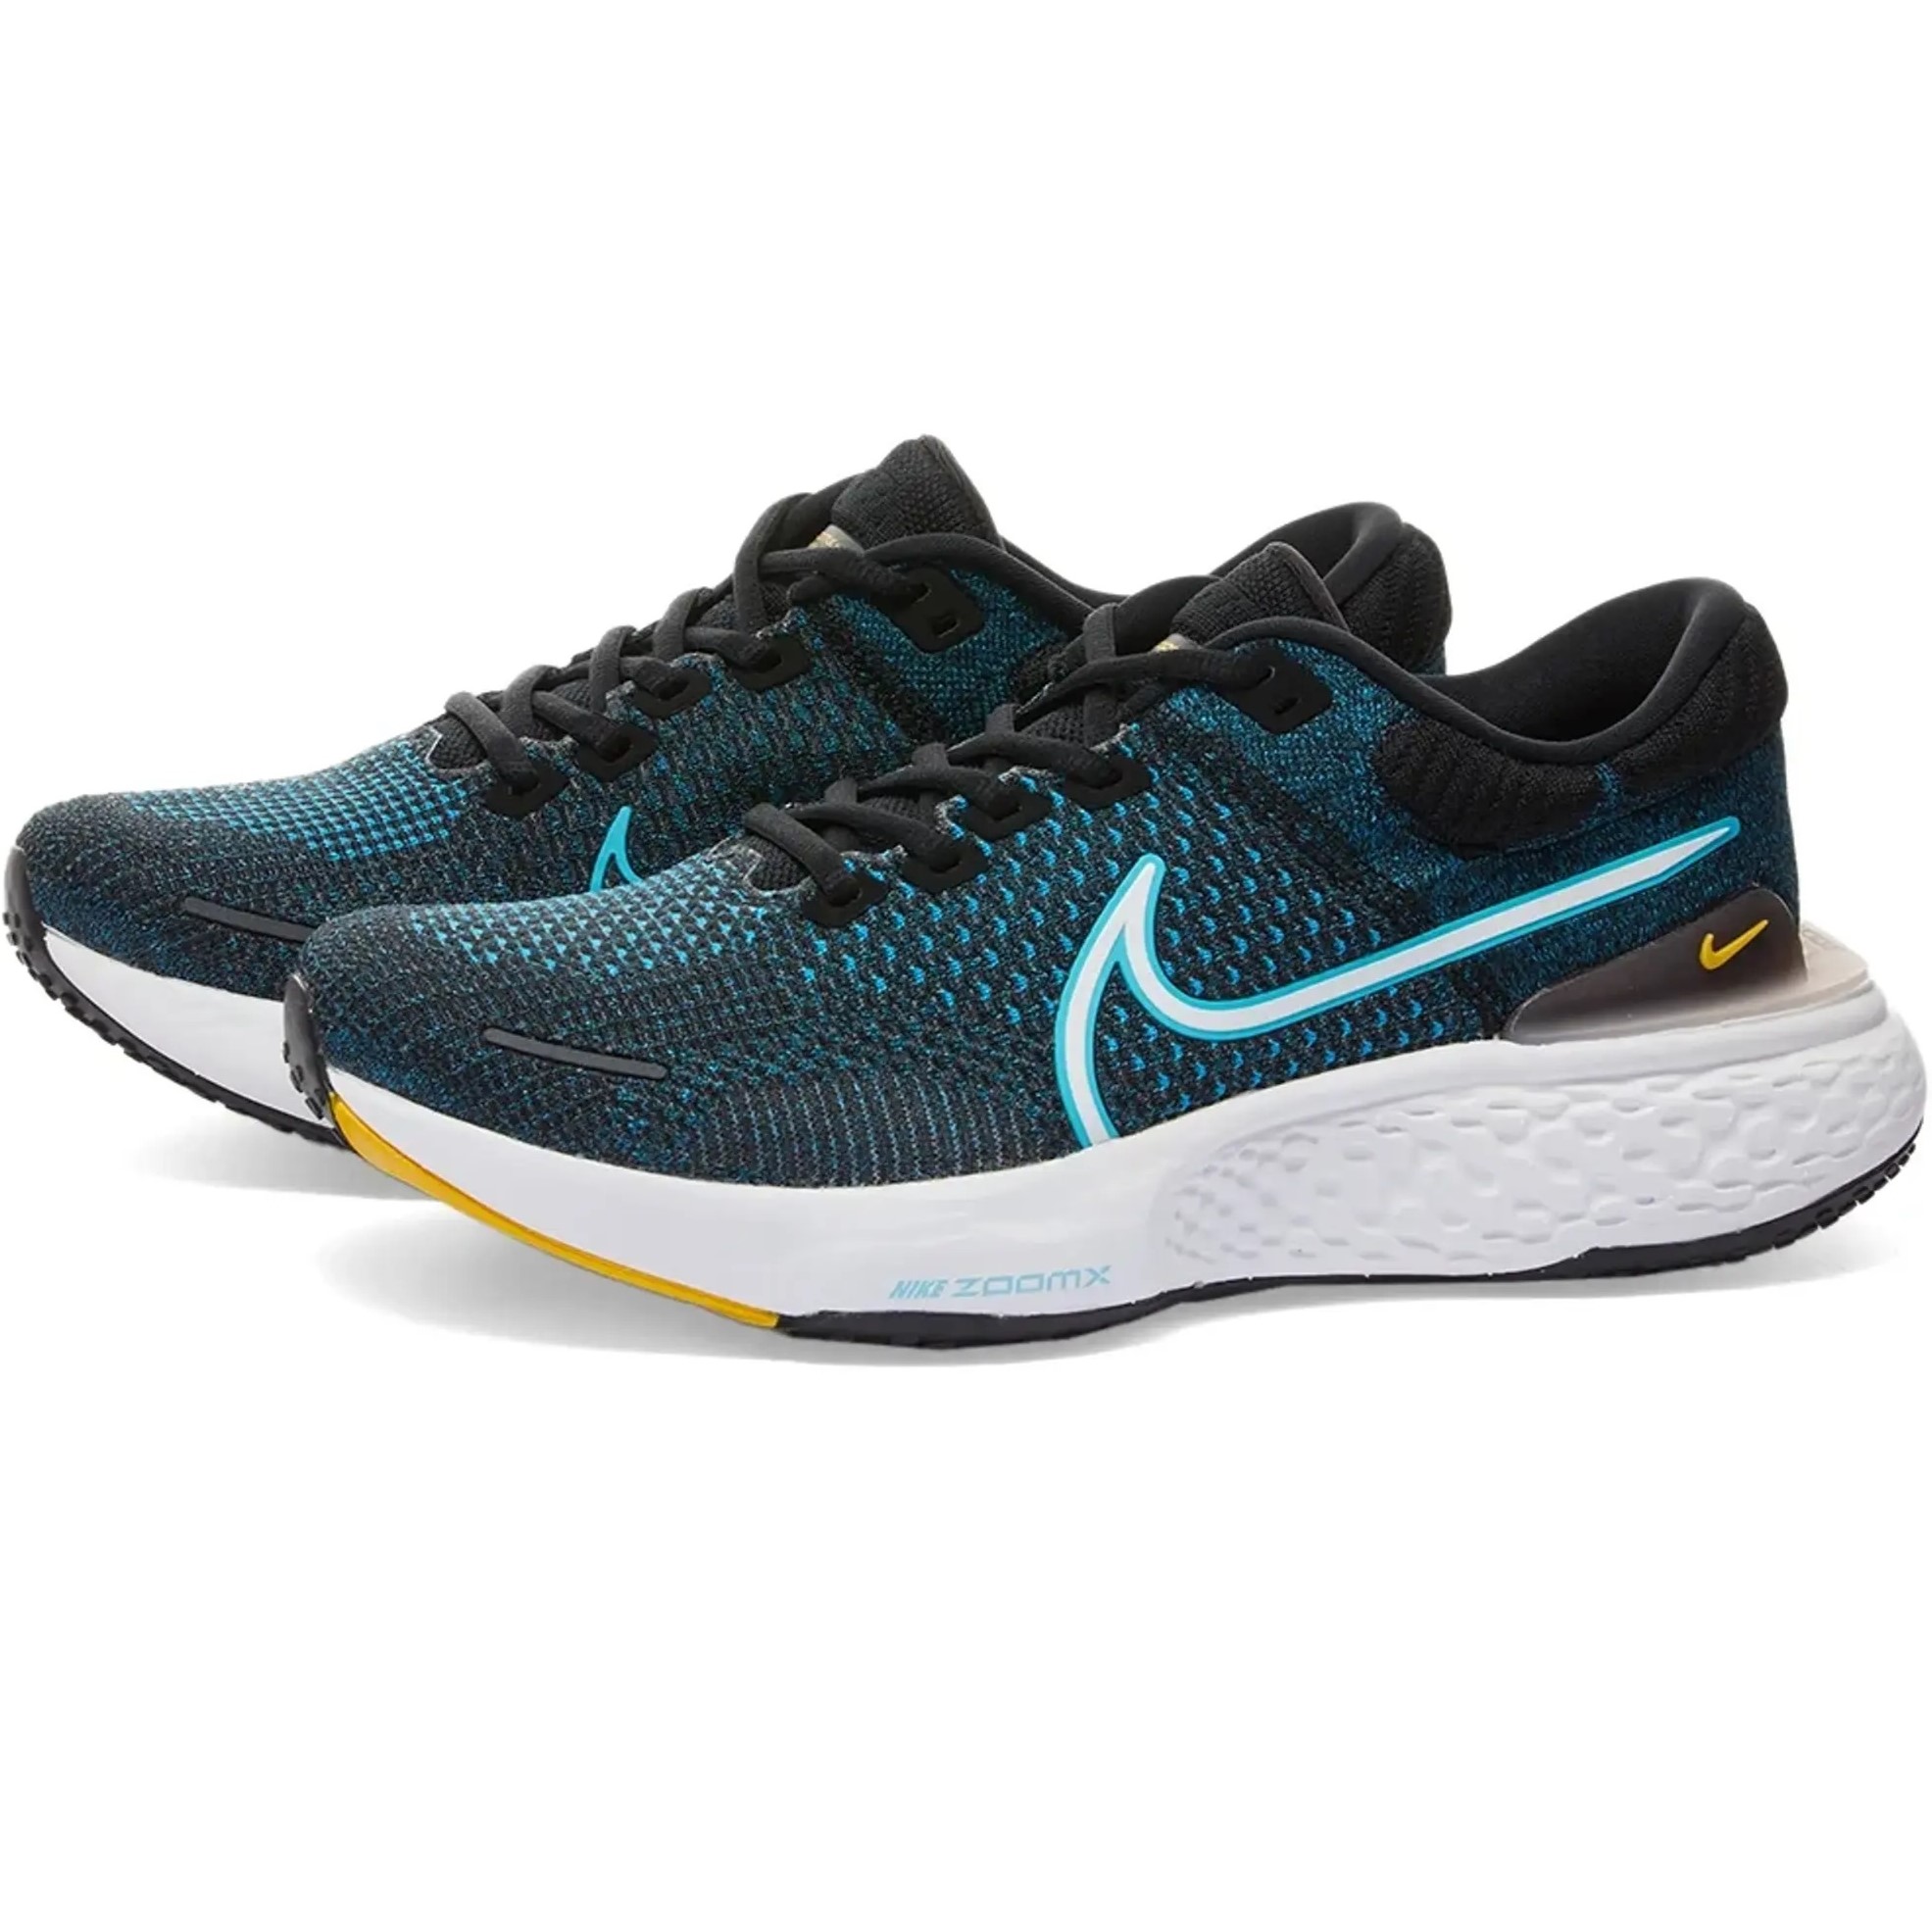 GIÀY THỂ THAO NIKE NAM ZOOMX INVINCIBLE RUN FLYKNIT 2 BLACK CHLORINE BLUE WHITE DH5425-003 7